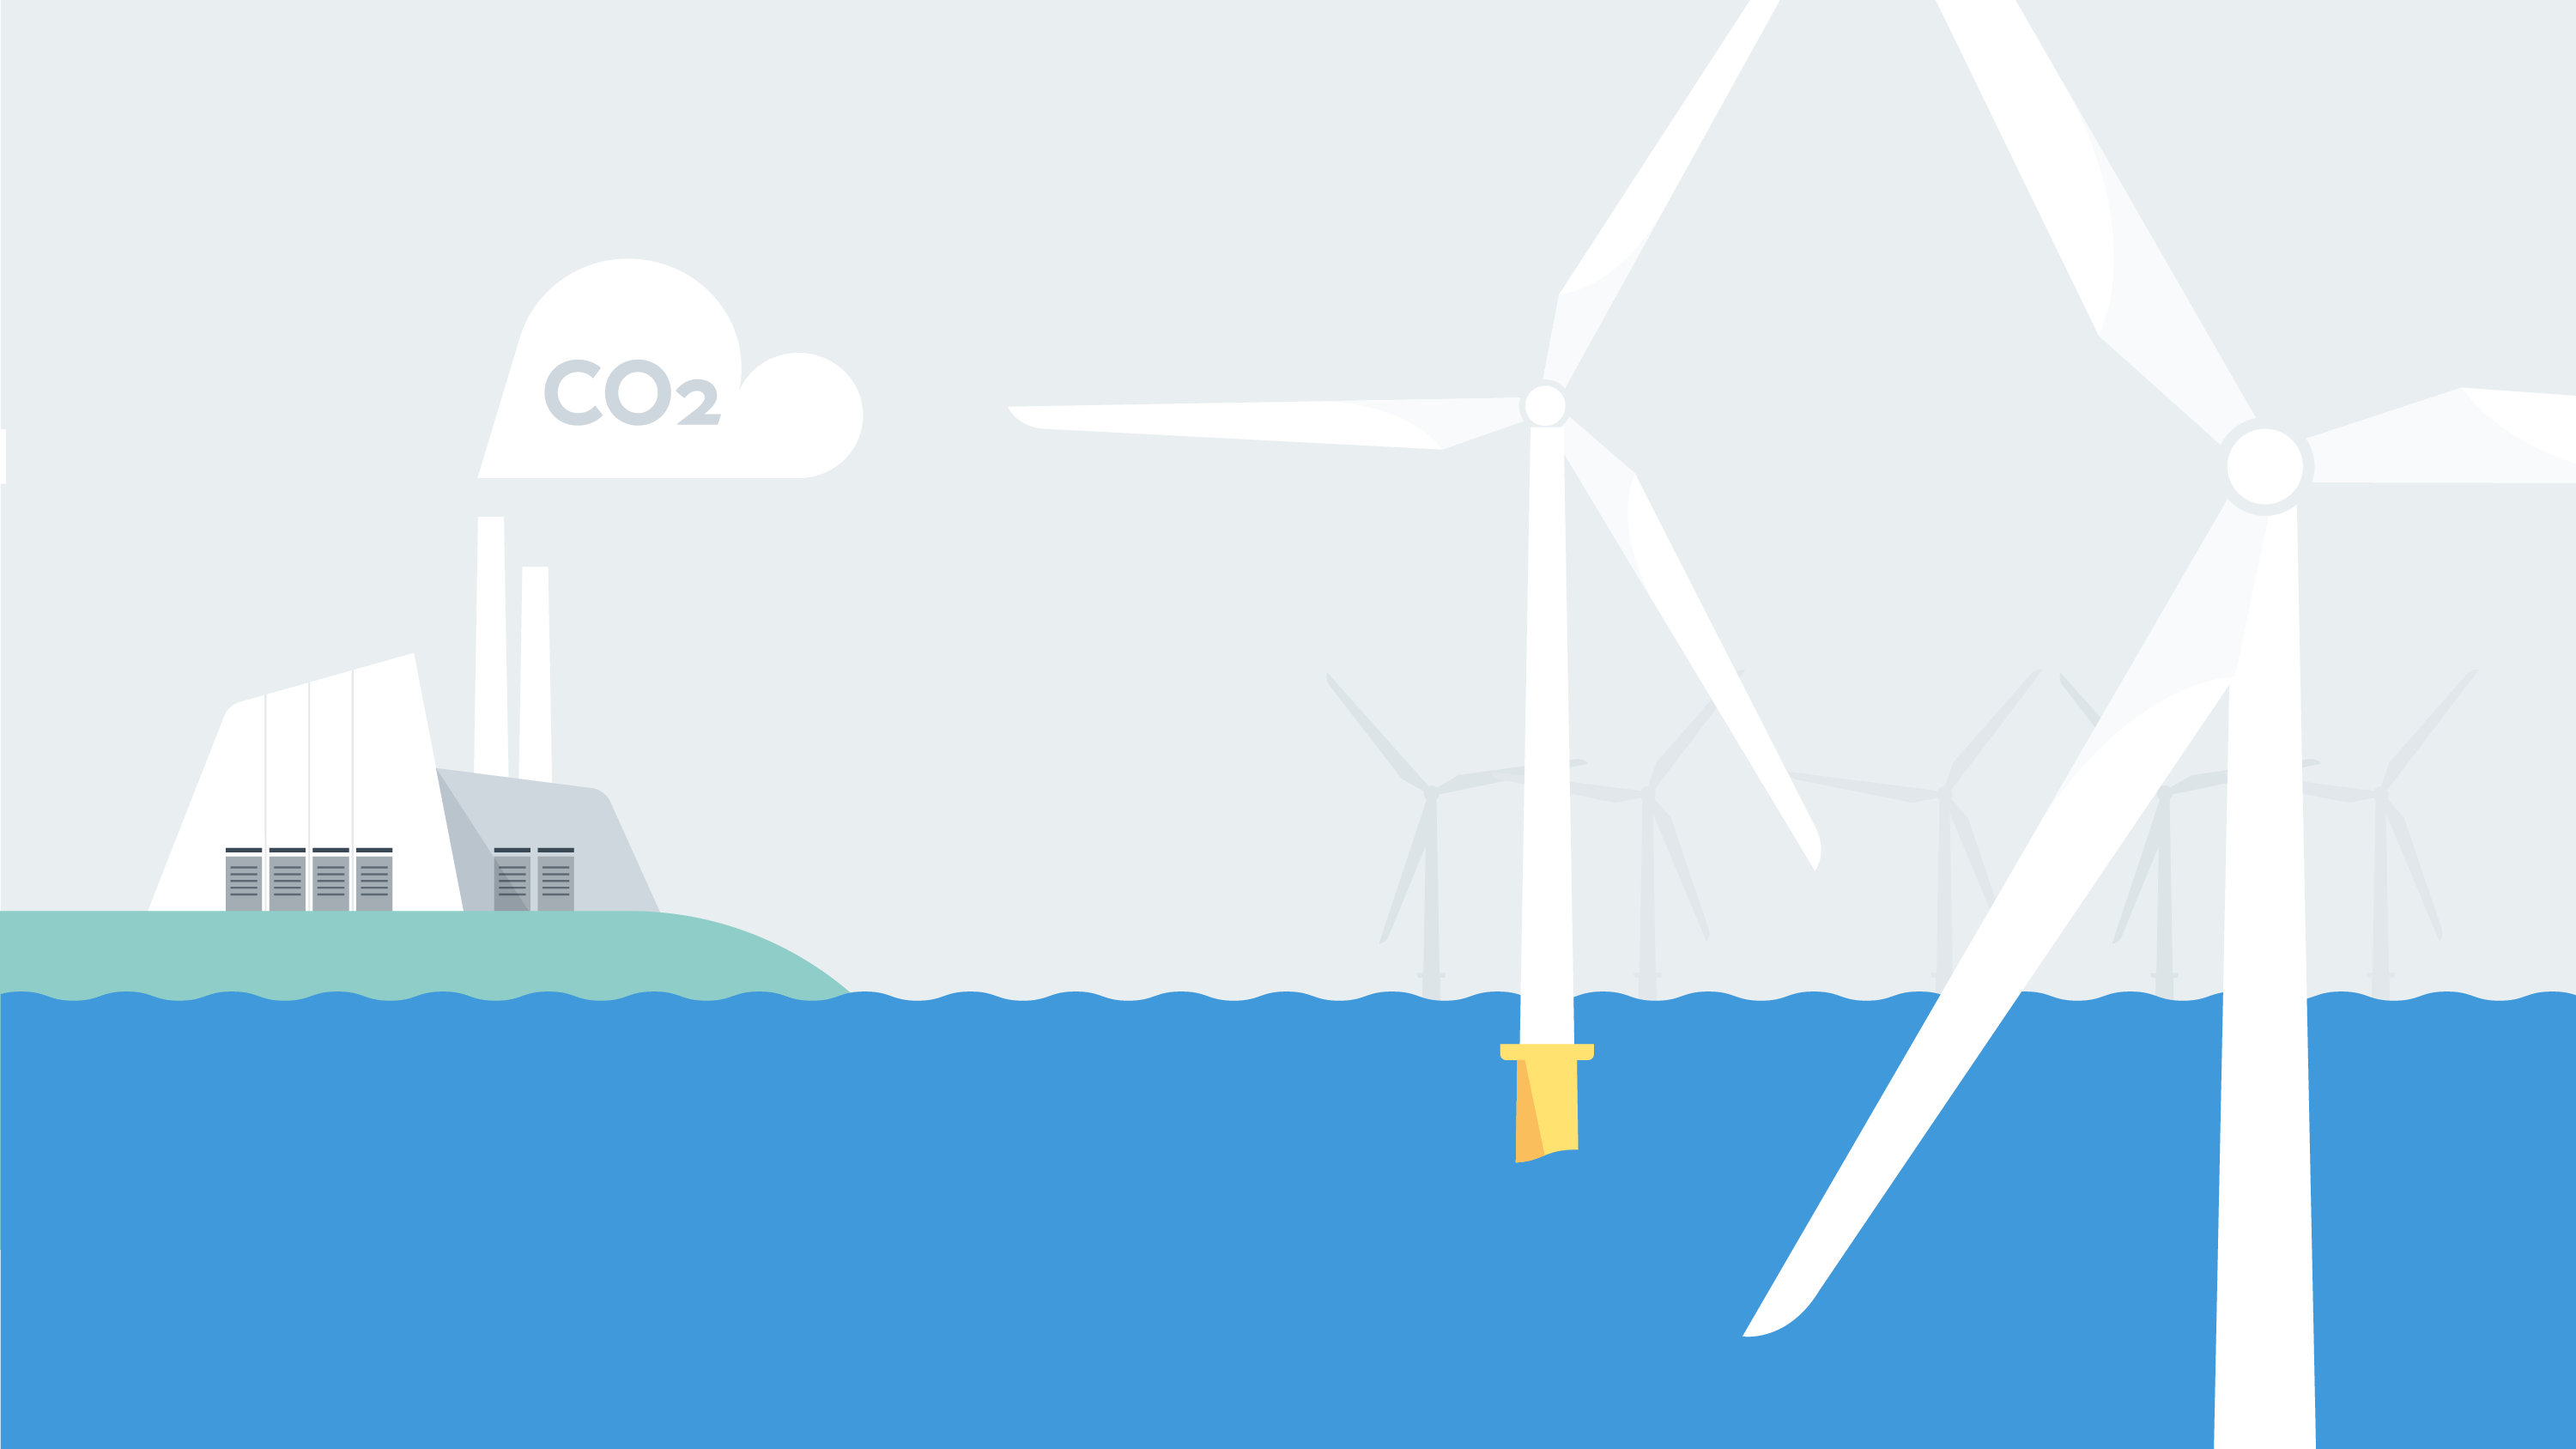 An offshore wind turbine by an onshore factory emitting carbon represent the limited carbon footprint of offshore wind.